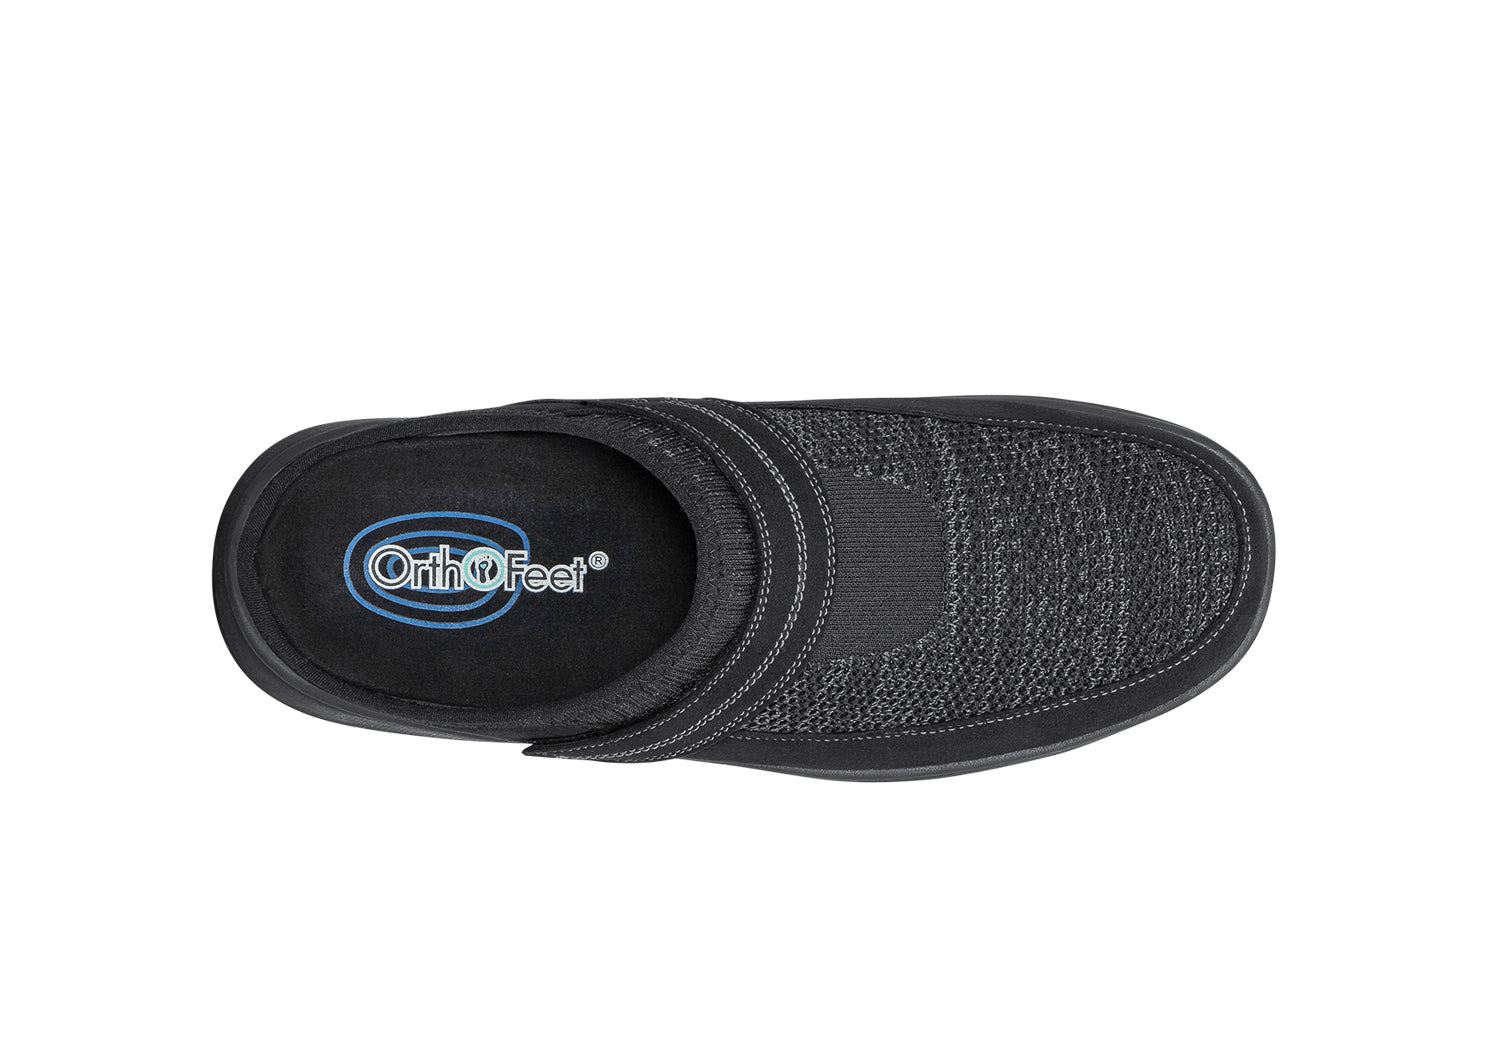 Arch Support Men's Slippers | Orthofeet